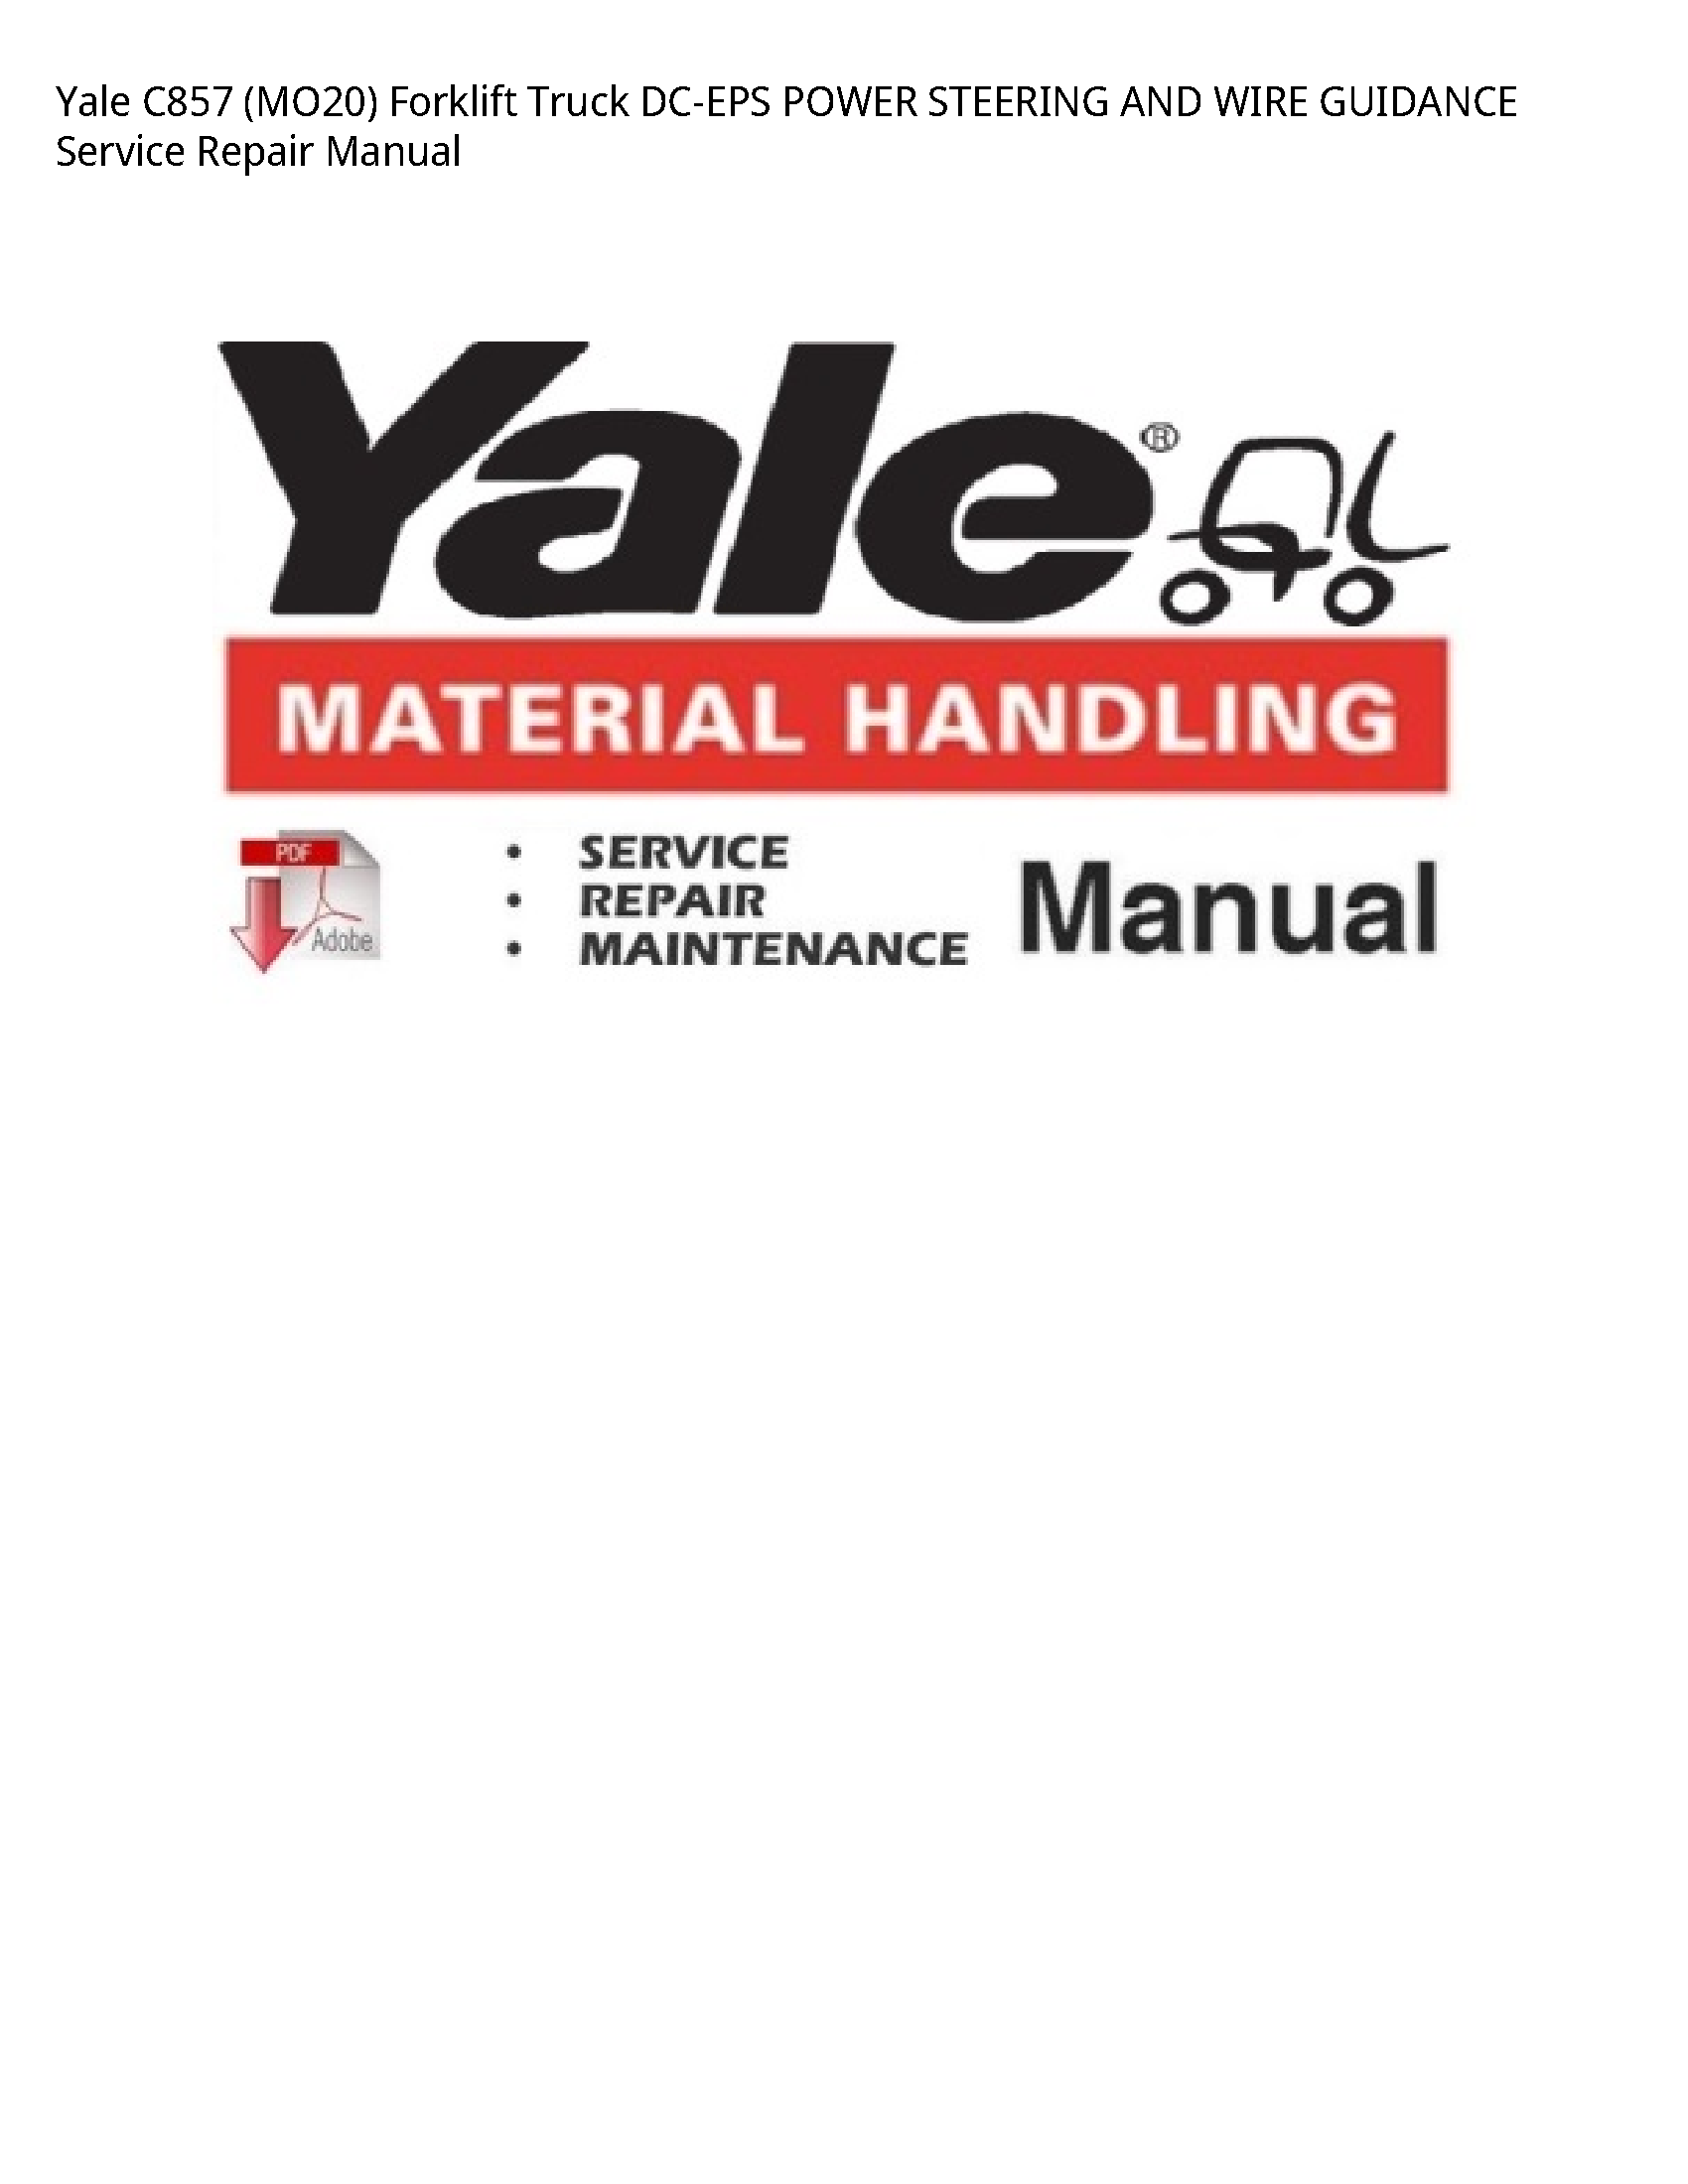 Yale C857 Forklift Truck DC-EPS POWER STEERING AND WIRE GUIDANCE manual